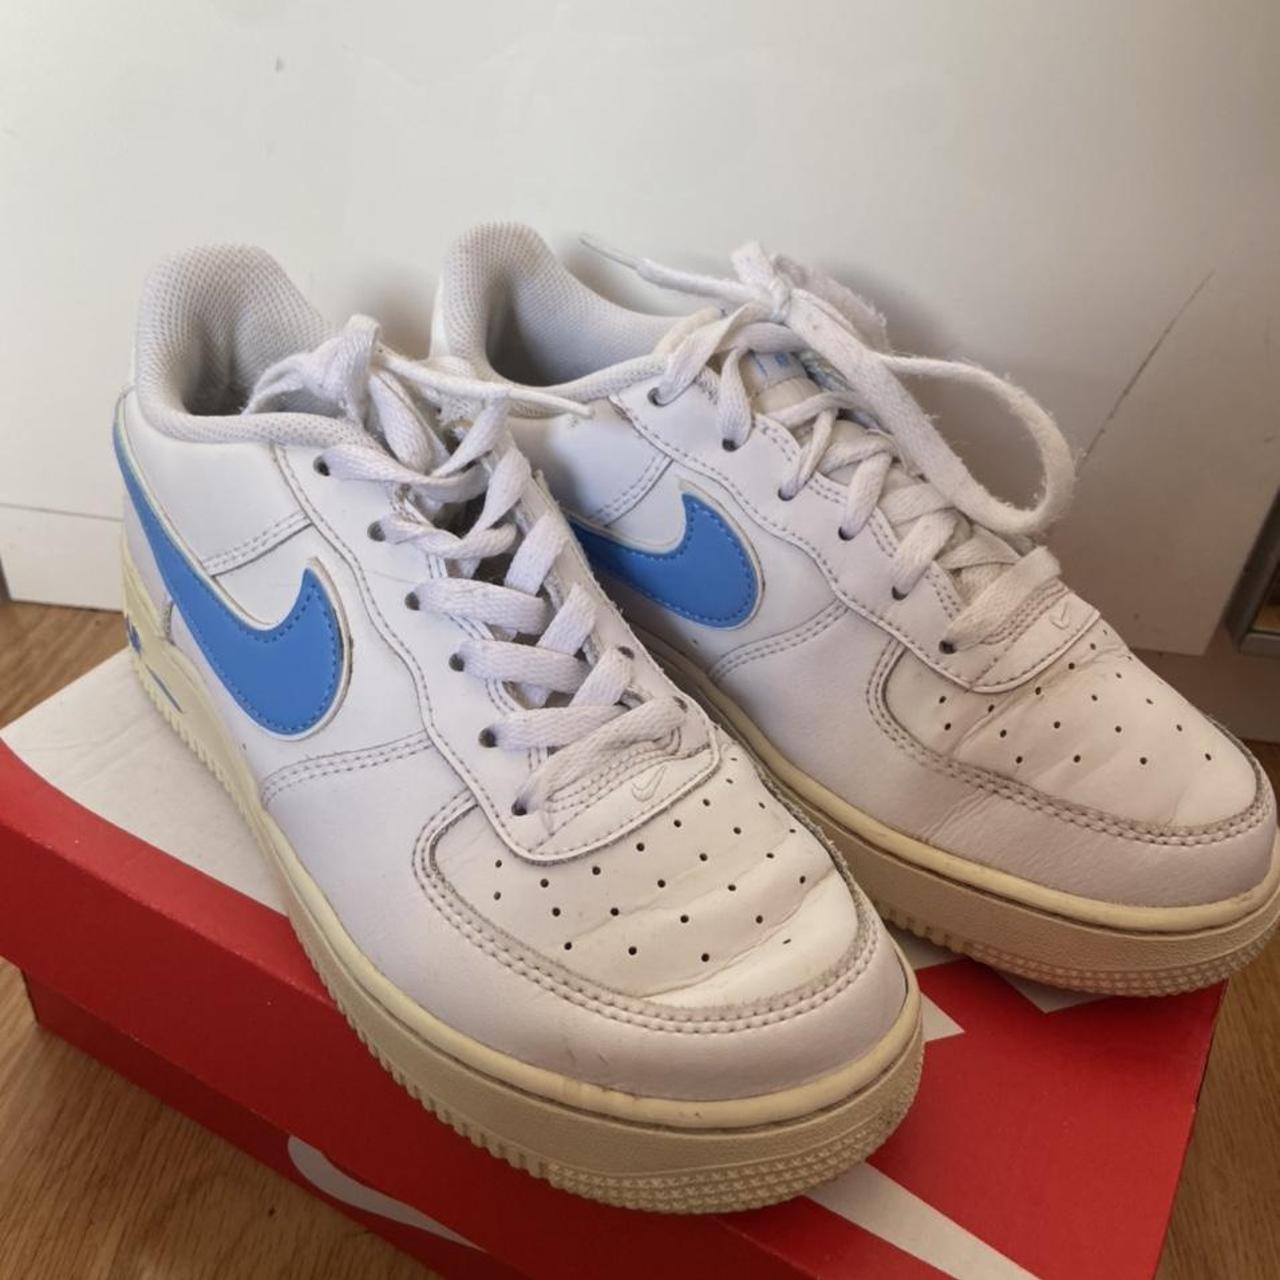 Nike Women's White and Blue Trainers | Depop